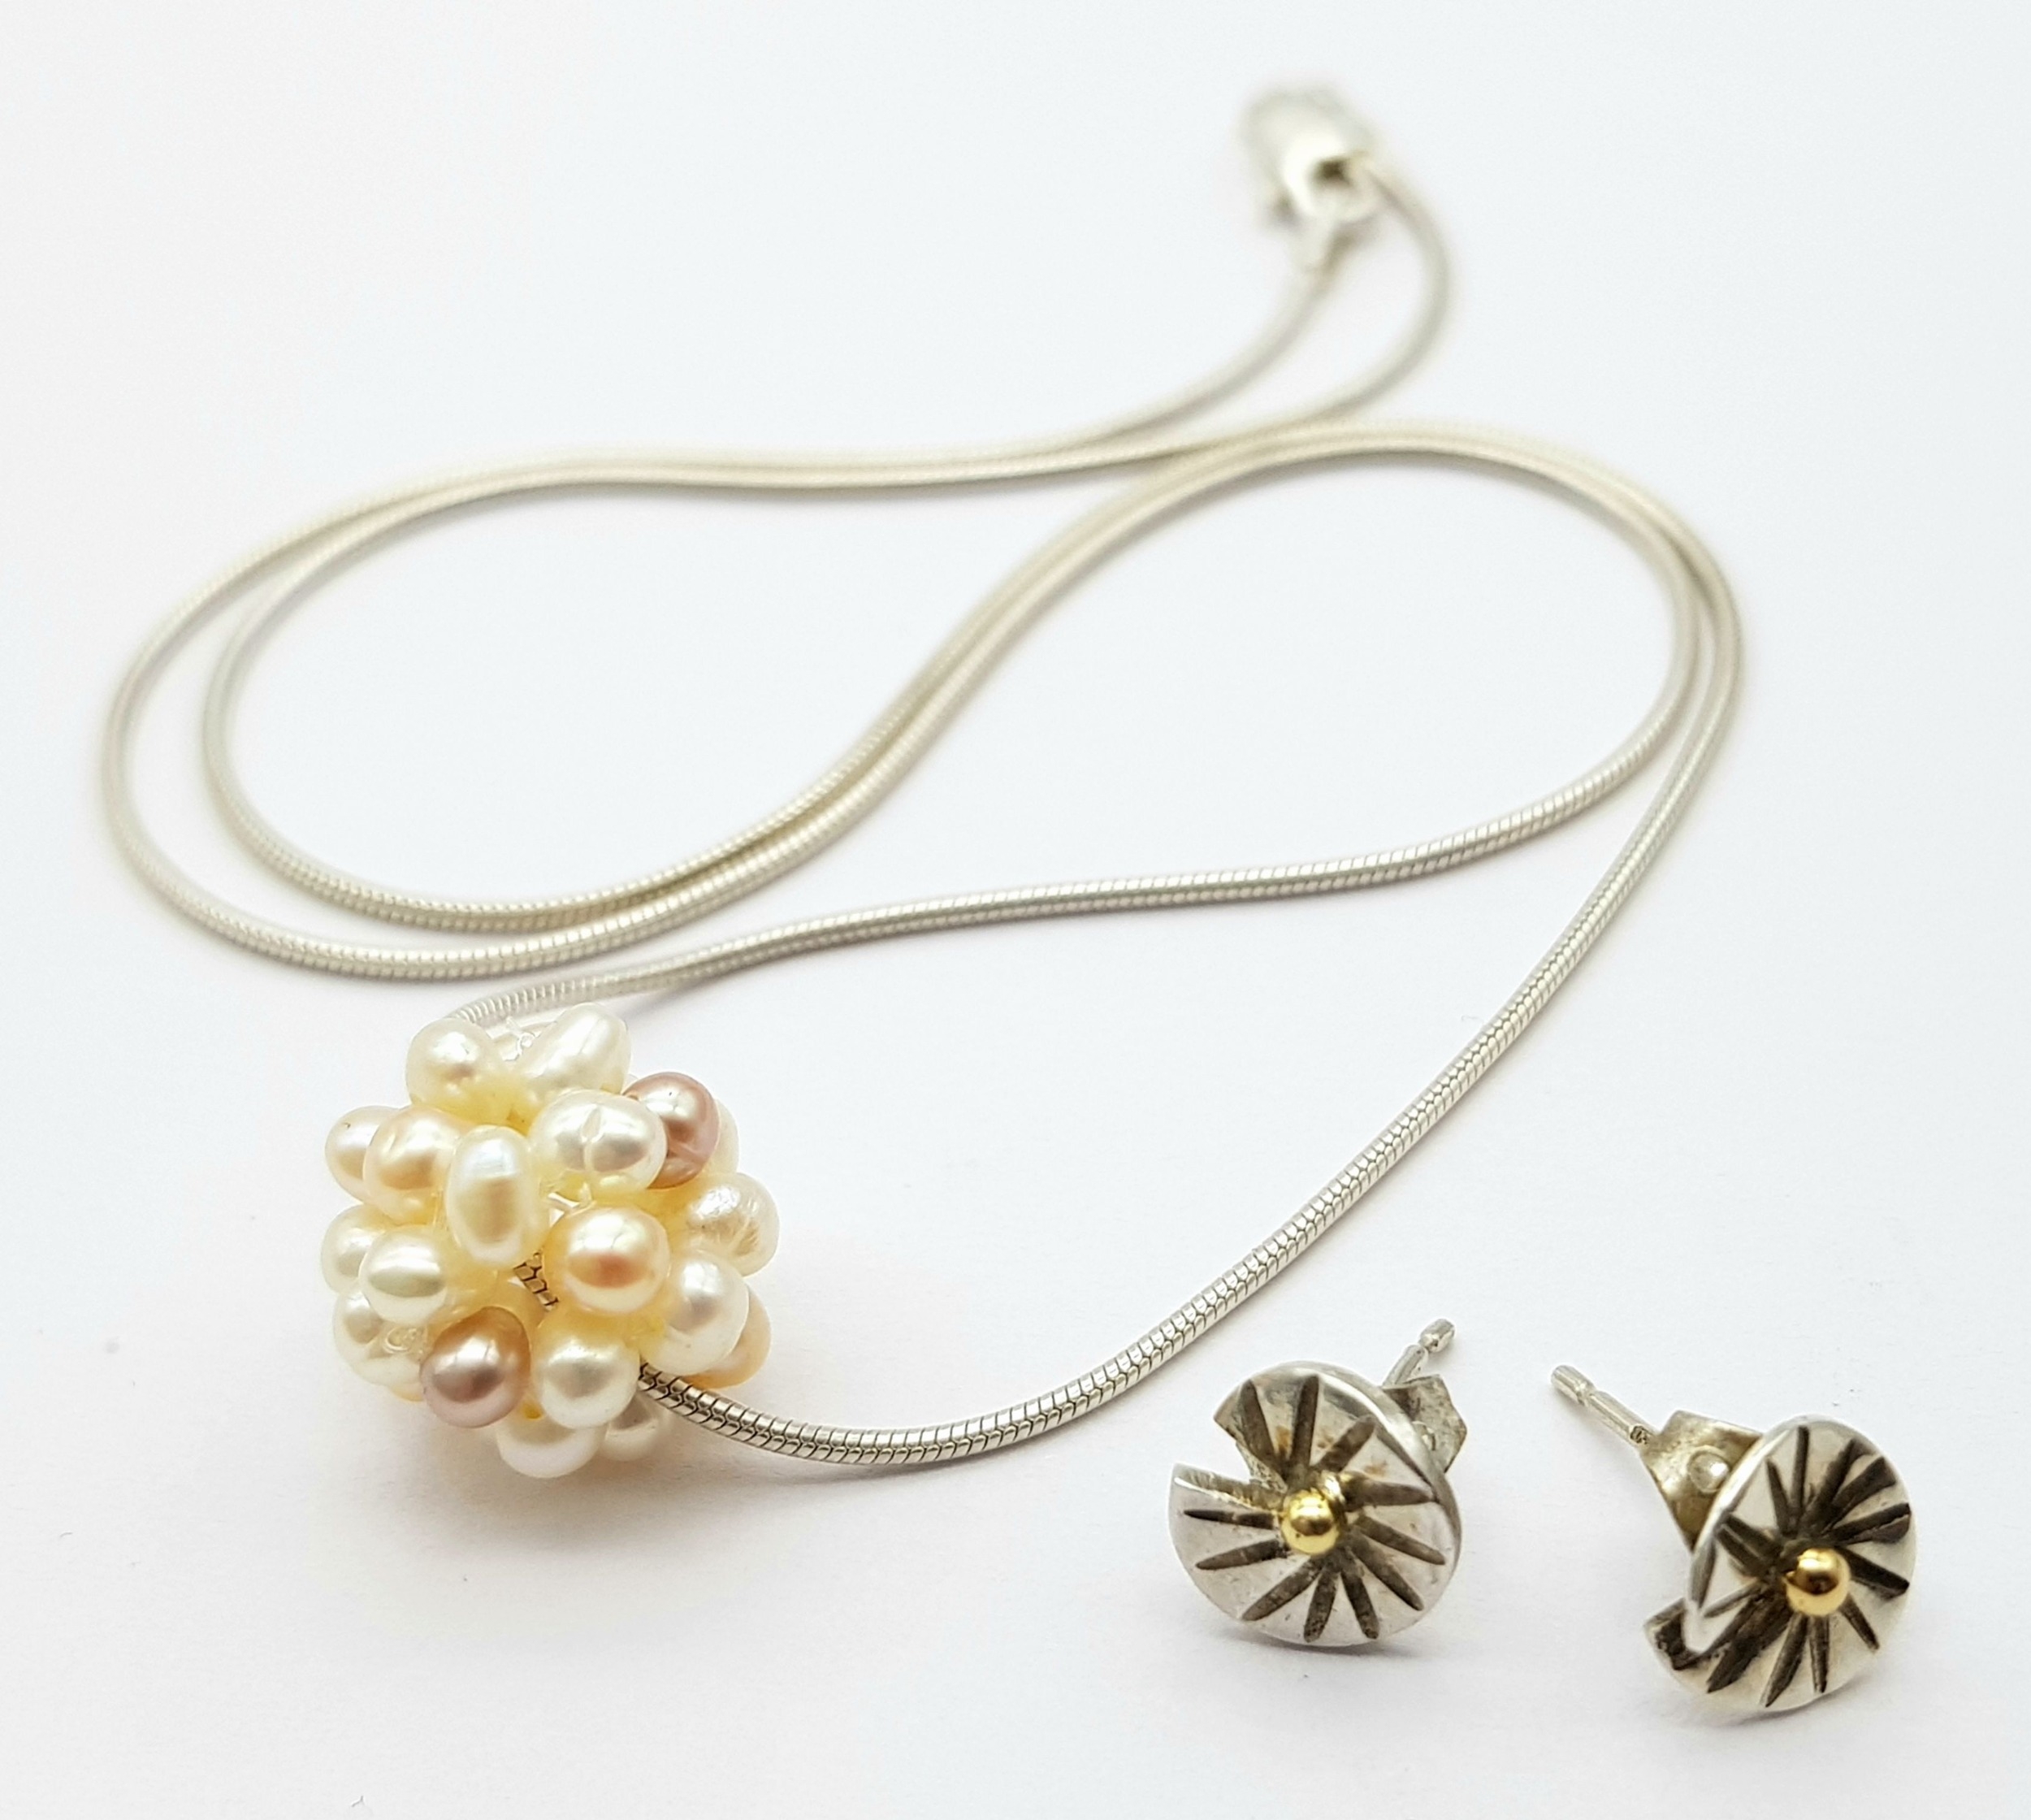 A Sterling Silver Necklace with Cluster Faux Seed Pearl Pendant and a pair of silver swirl stud - Image 5 of 6